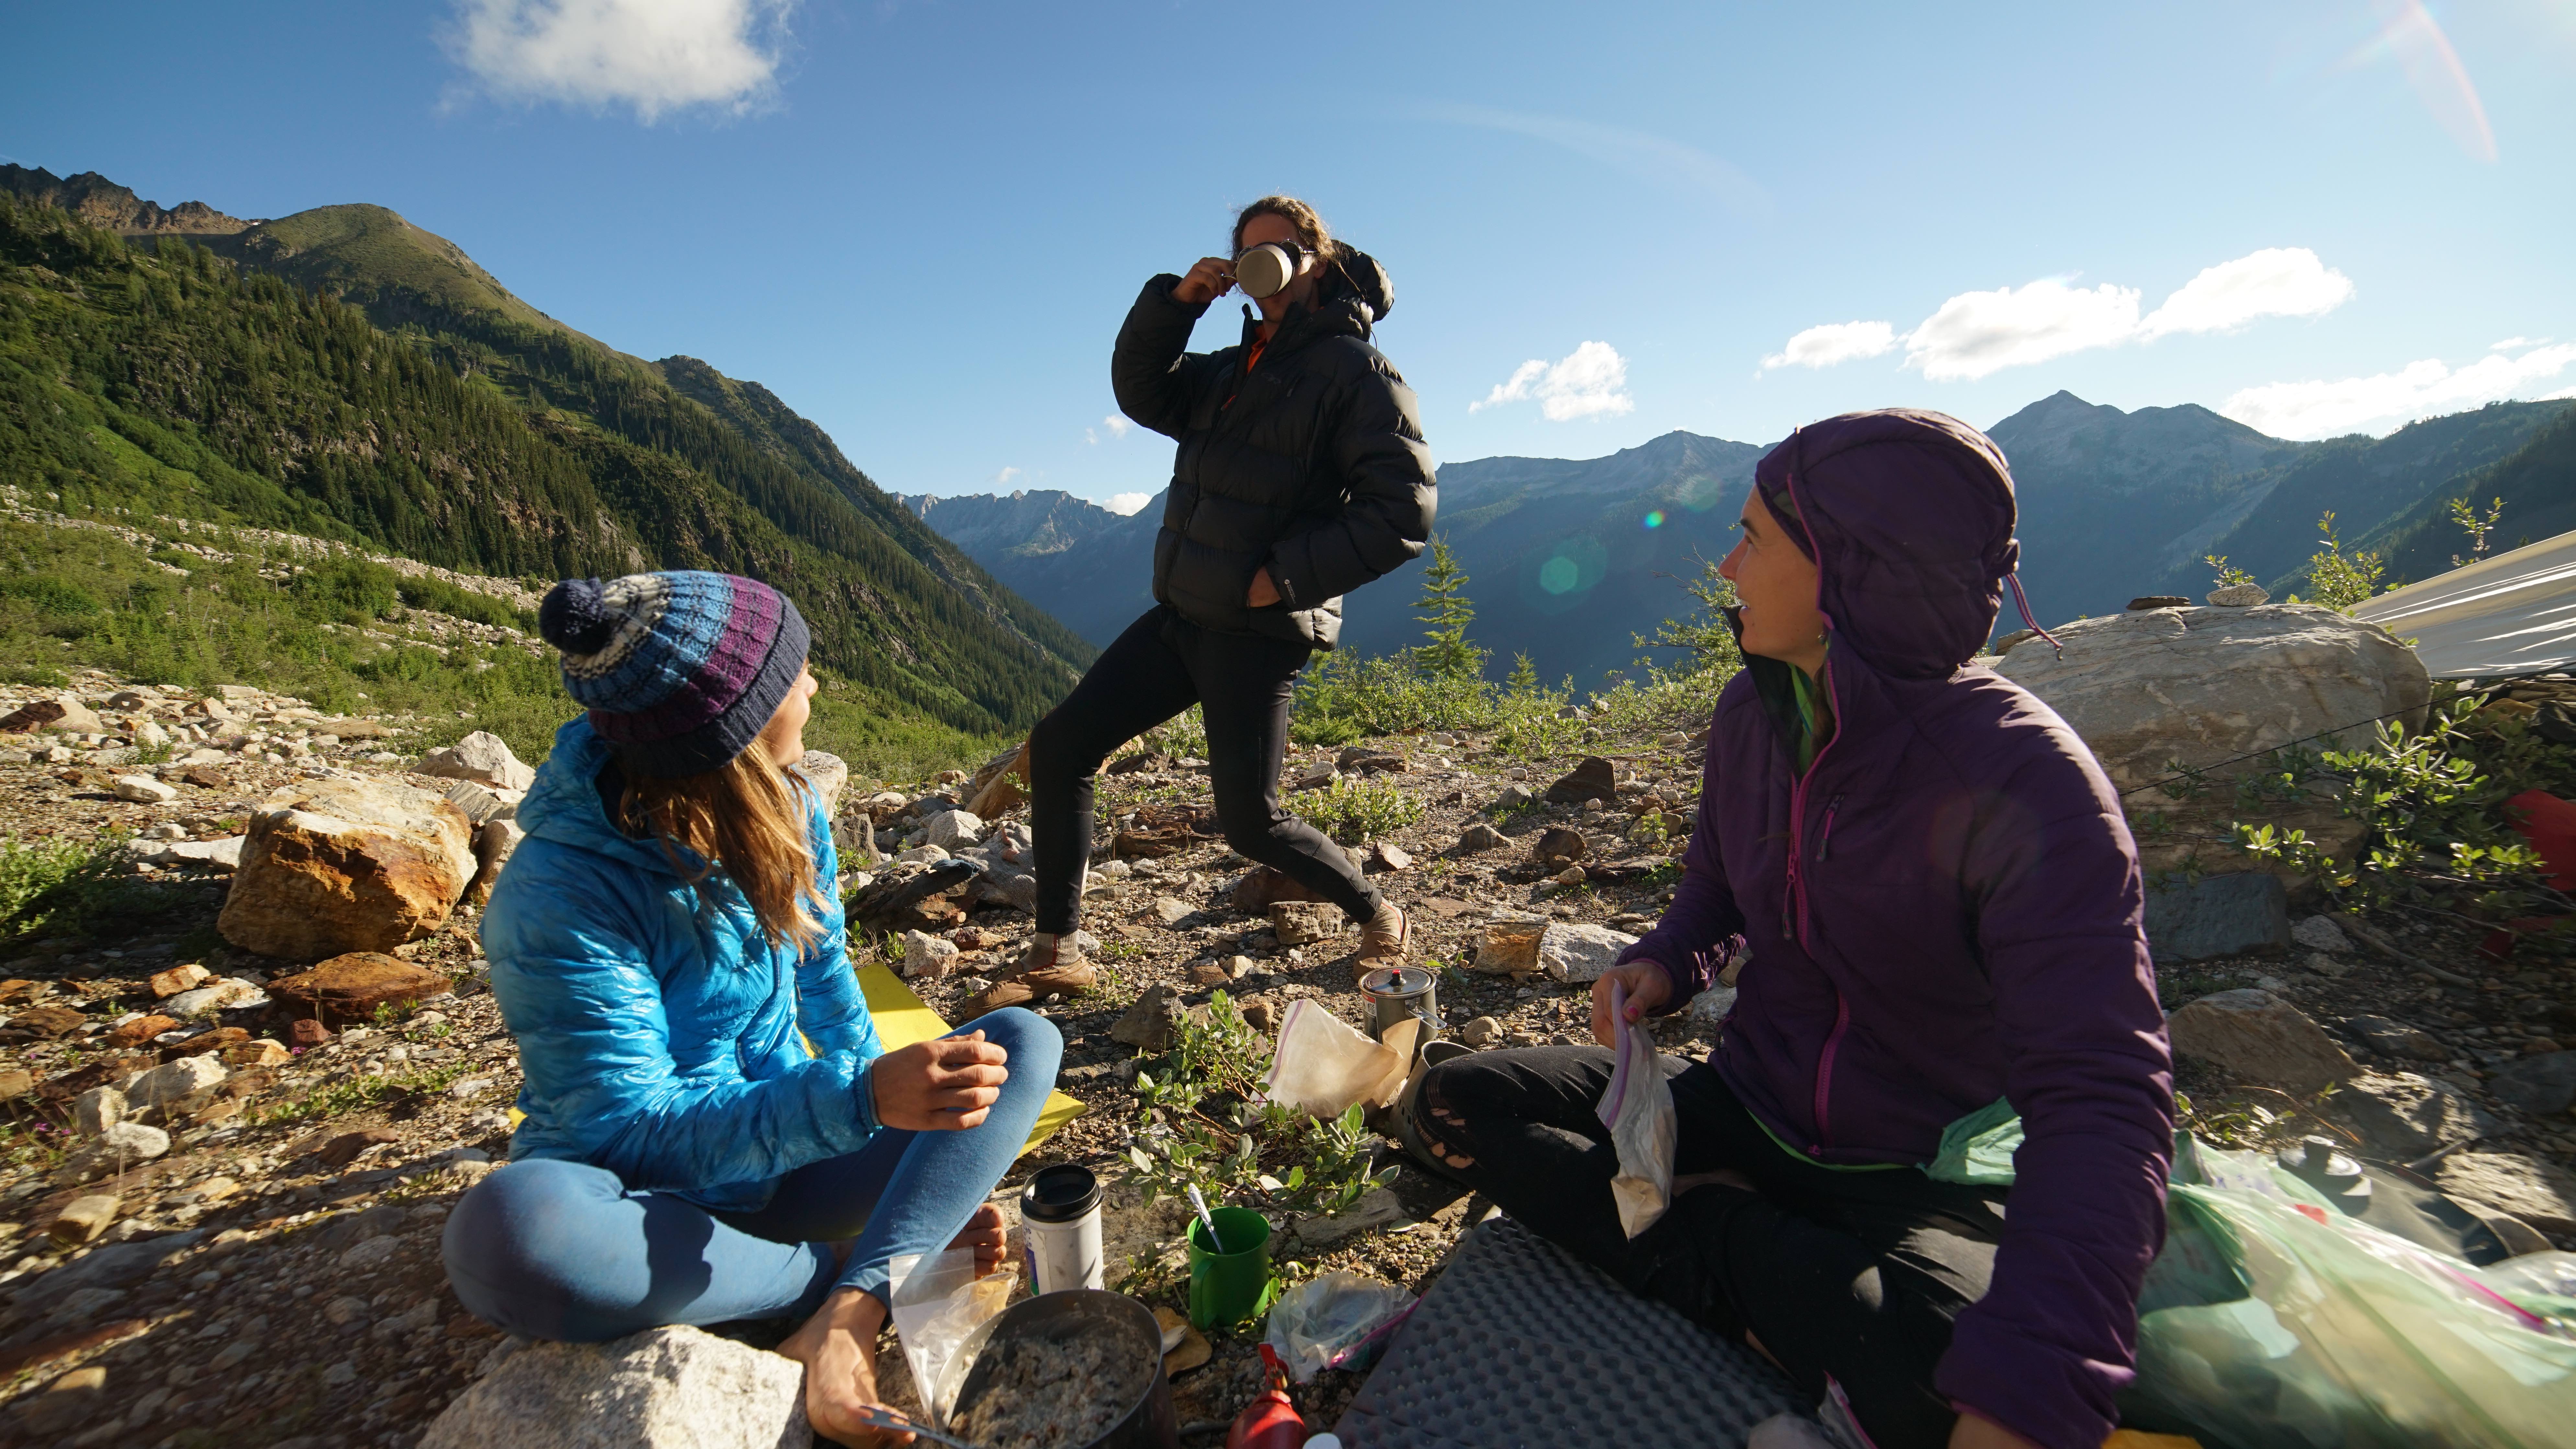 Jenny Abegg and Alix Morris look on as Forest Woodward gets enthusiastic about his morning coffee in basecamp. [Photo] Graham Zimmerman